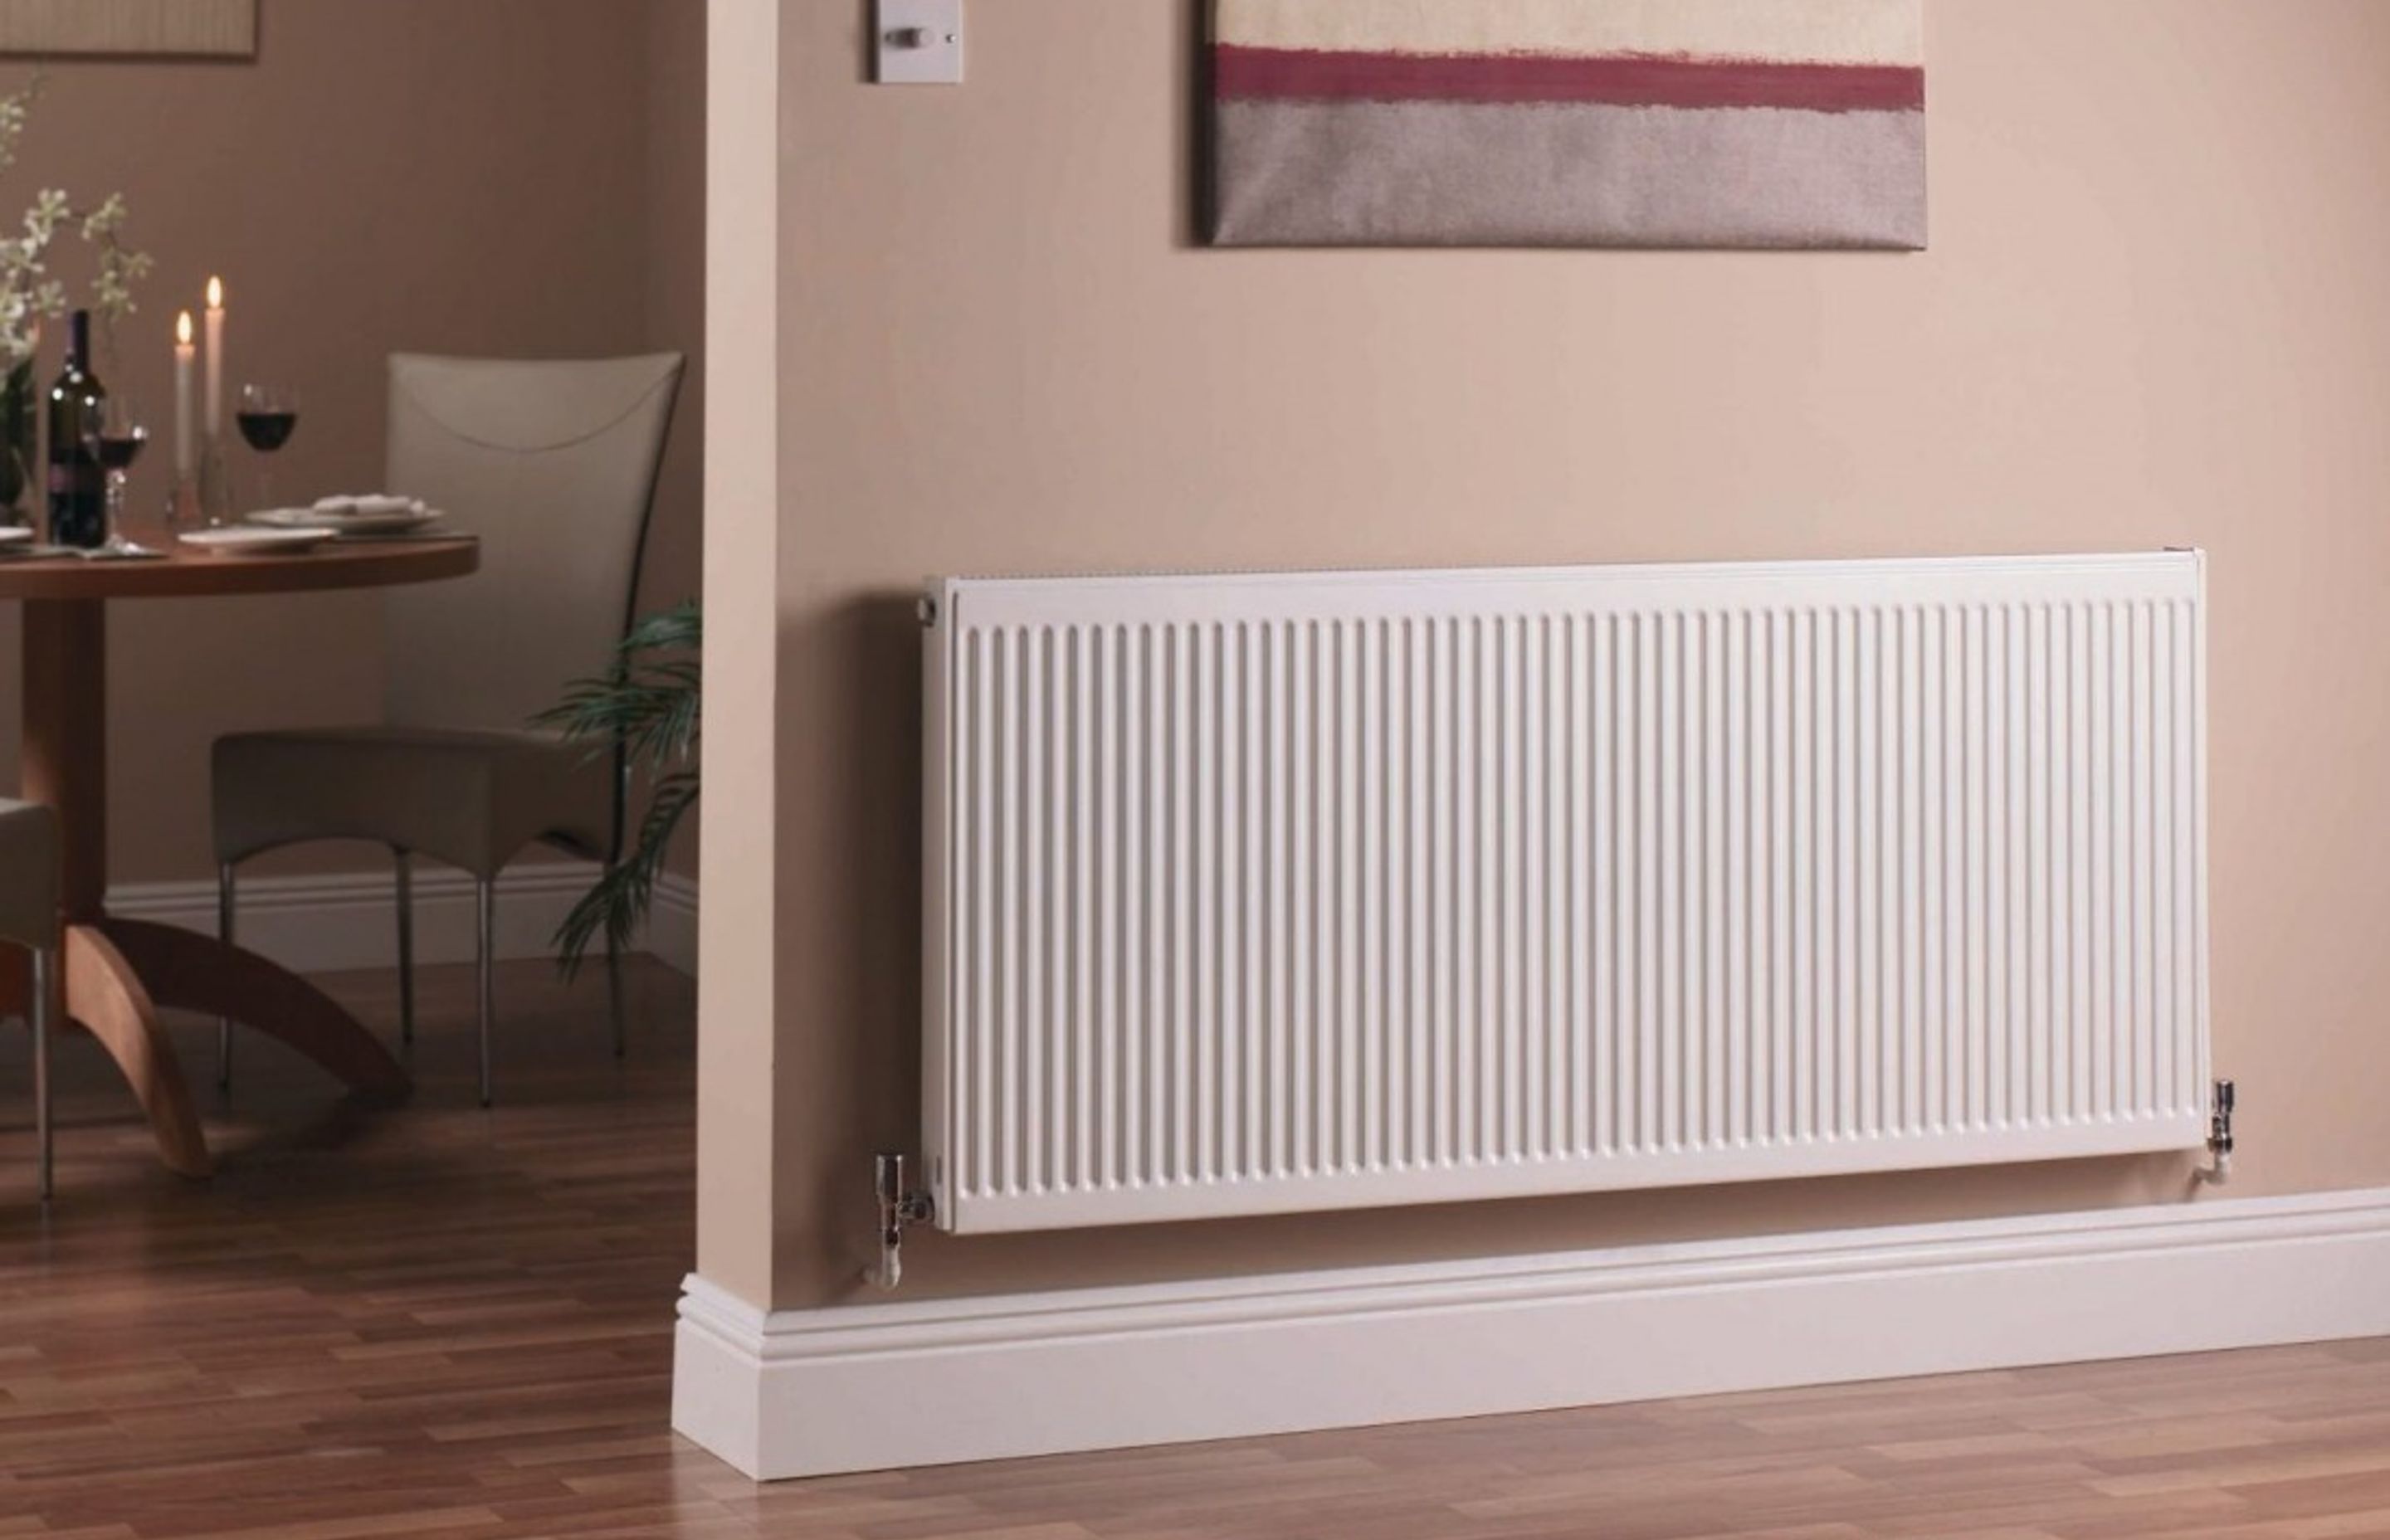 The Hi-Lo Compact requires less water to heat up so fits well with any energy-efficient home.